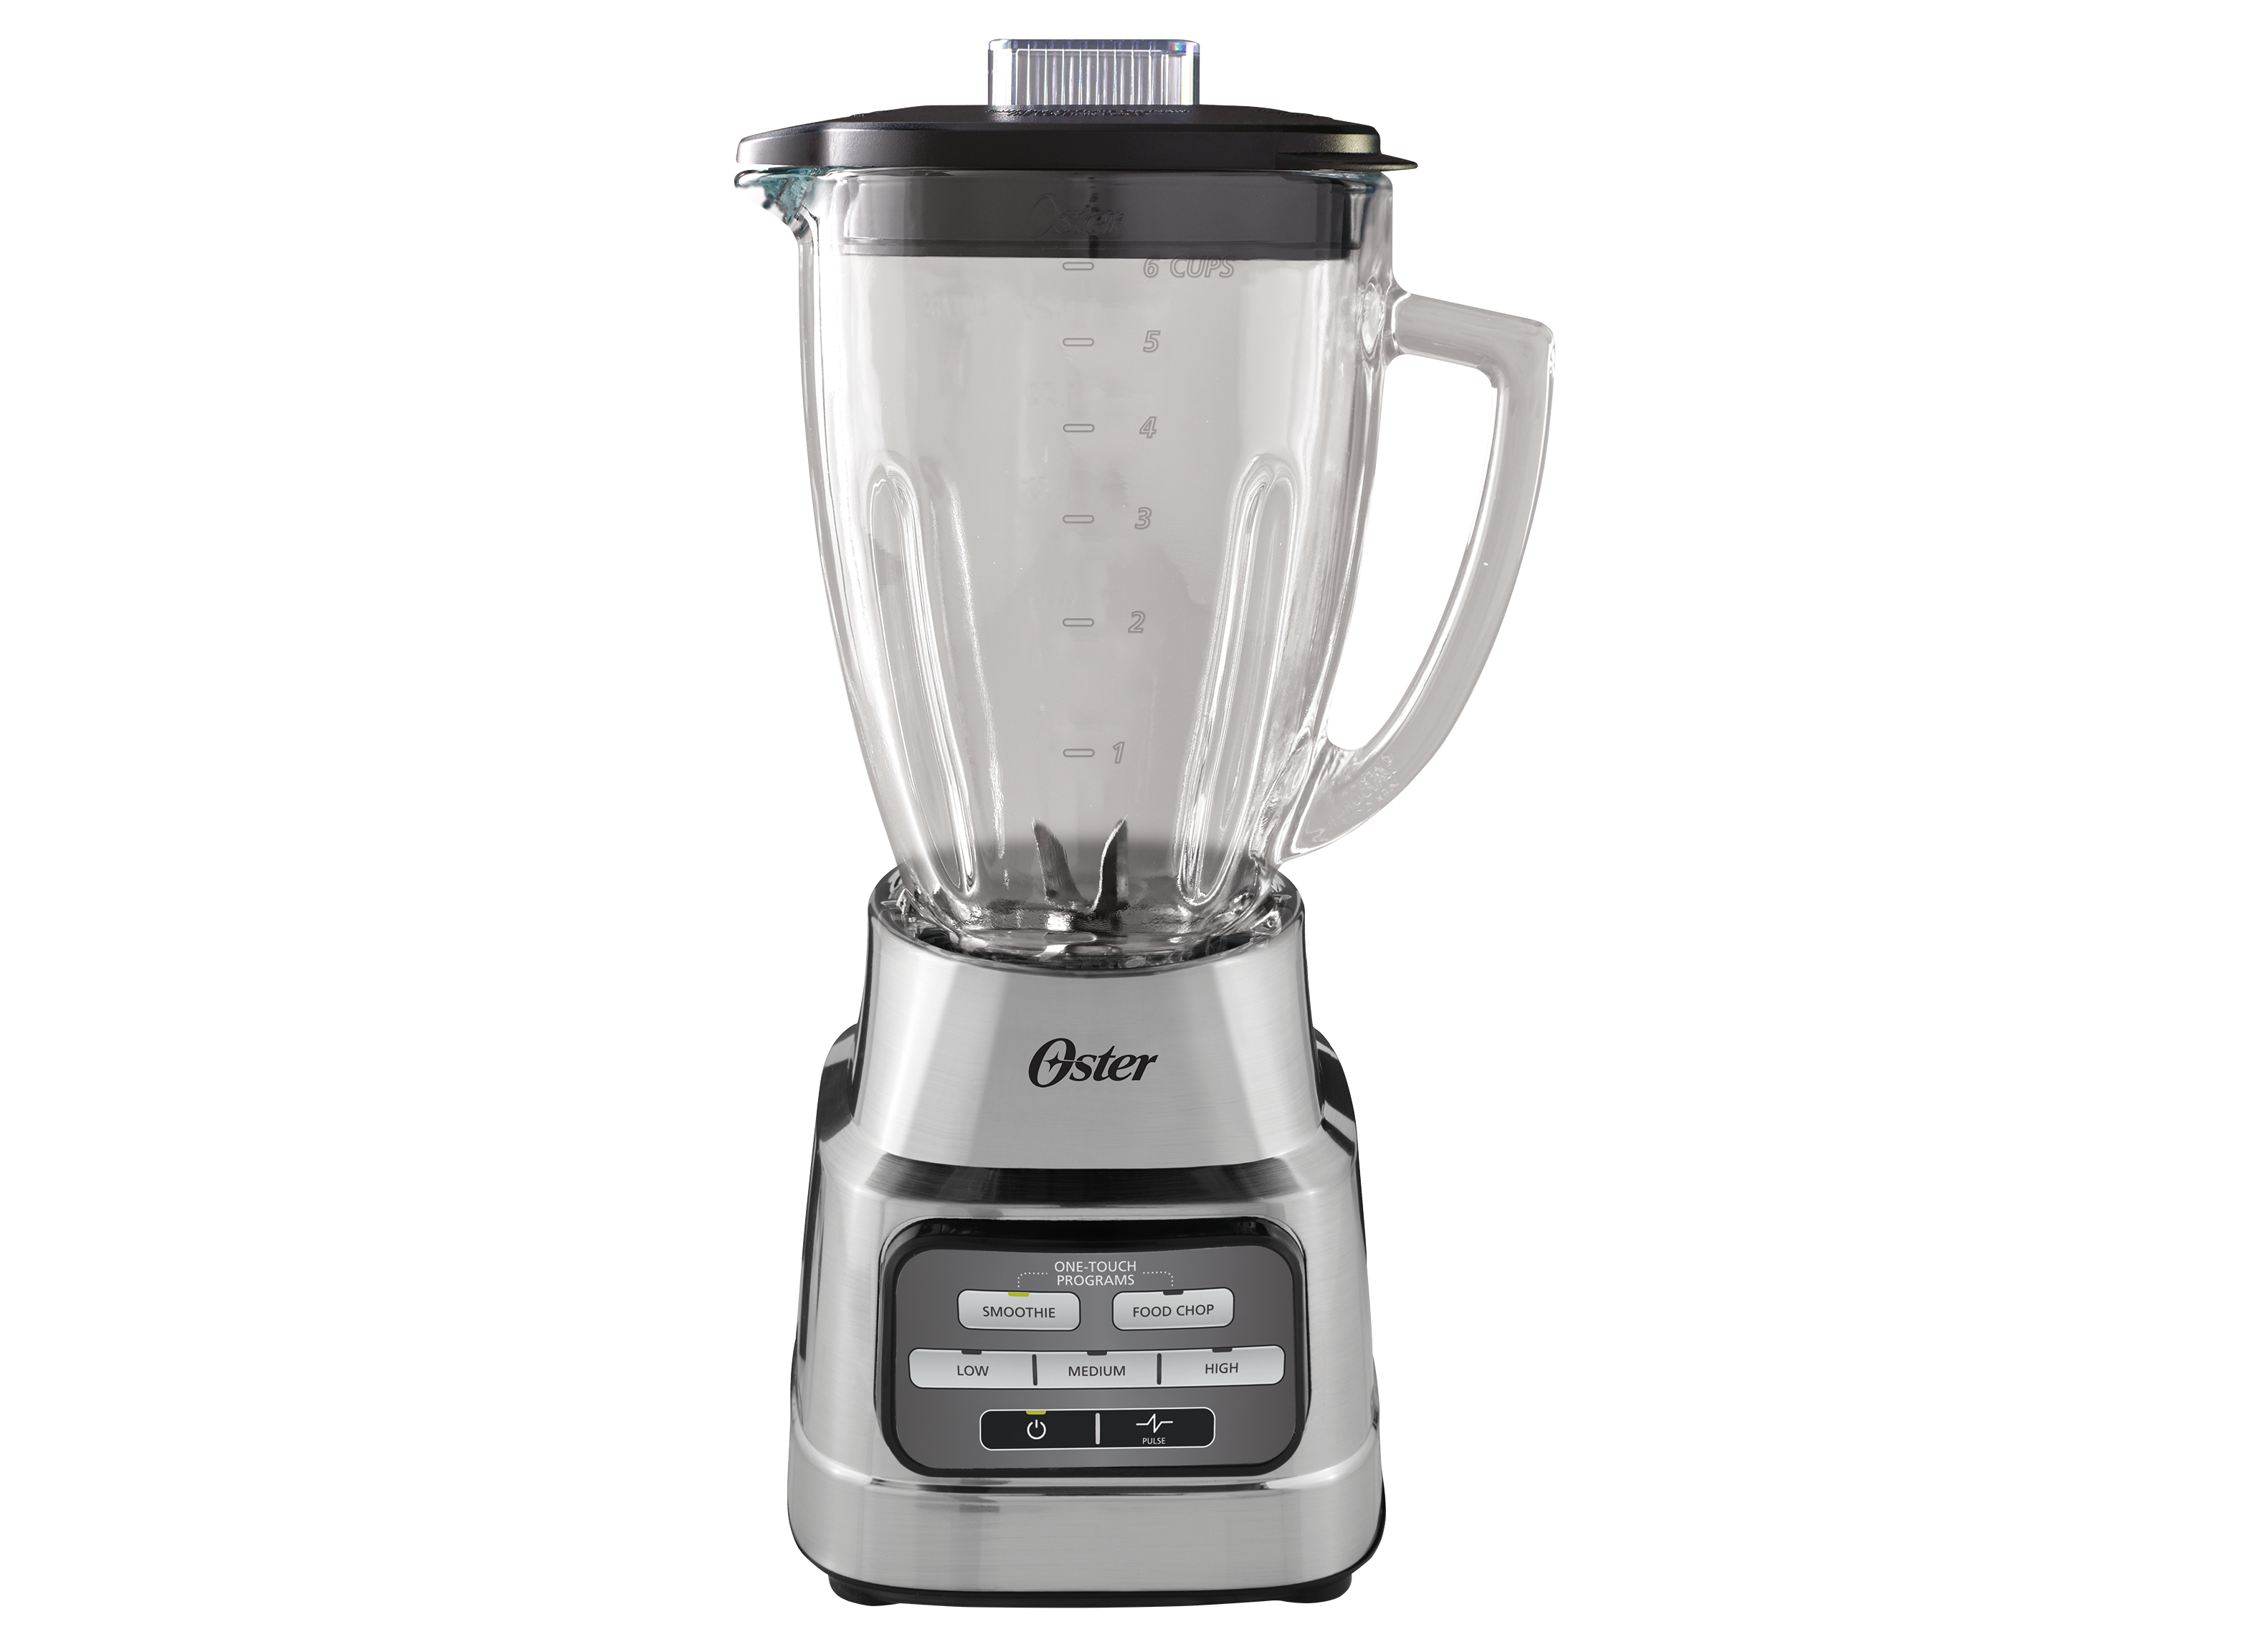 https://crdms.images.consumerreports.org/prod/products/cr/models/406728-full-sized-blenders-oster-2127004-one-touch-10029808.png